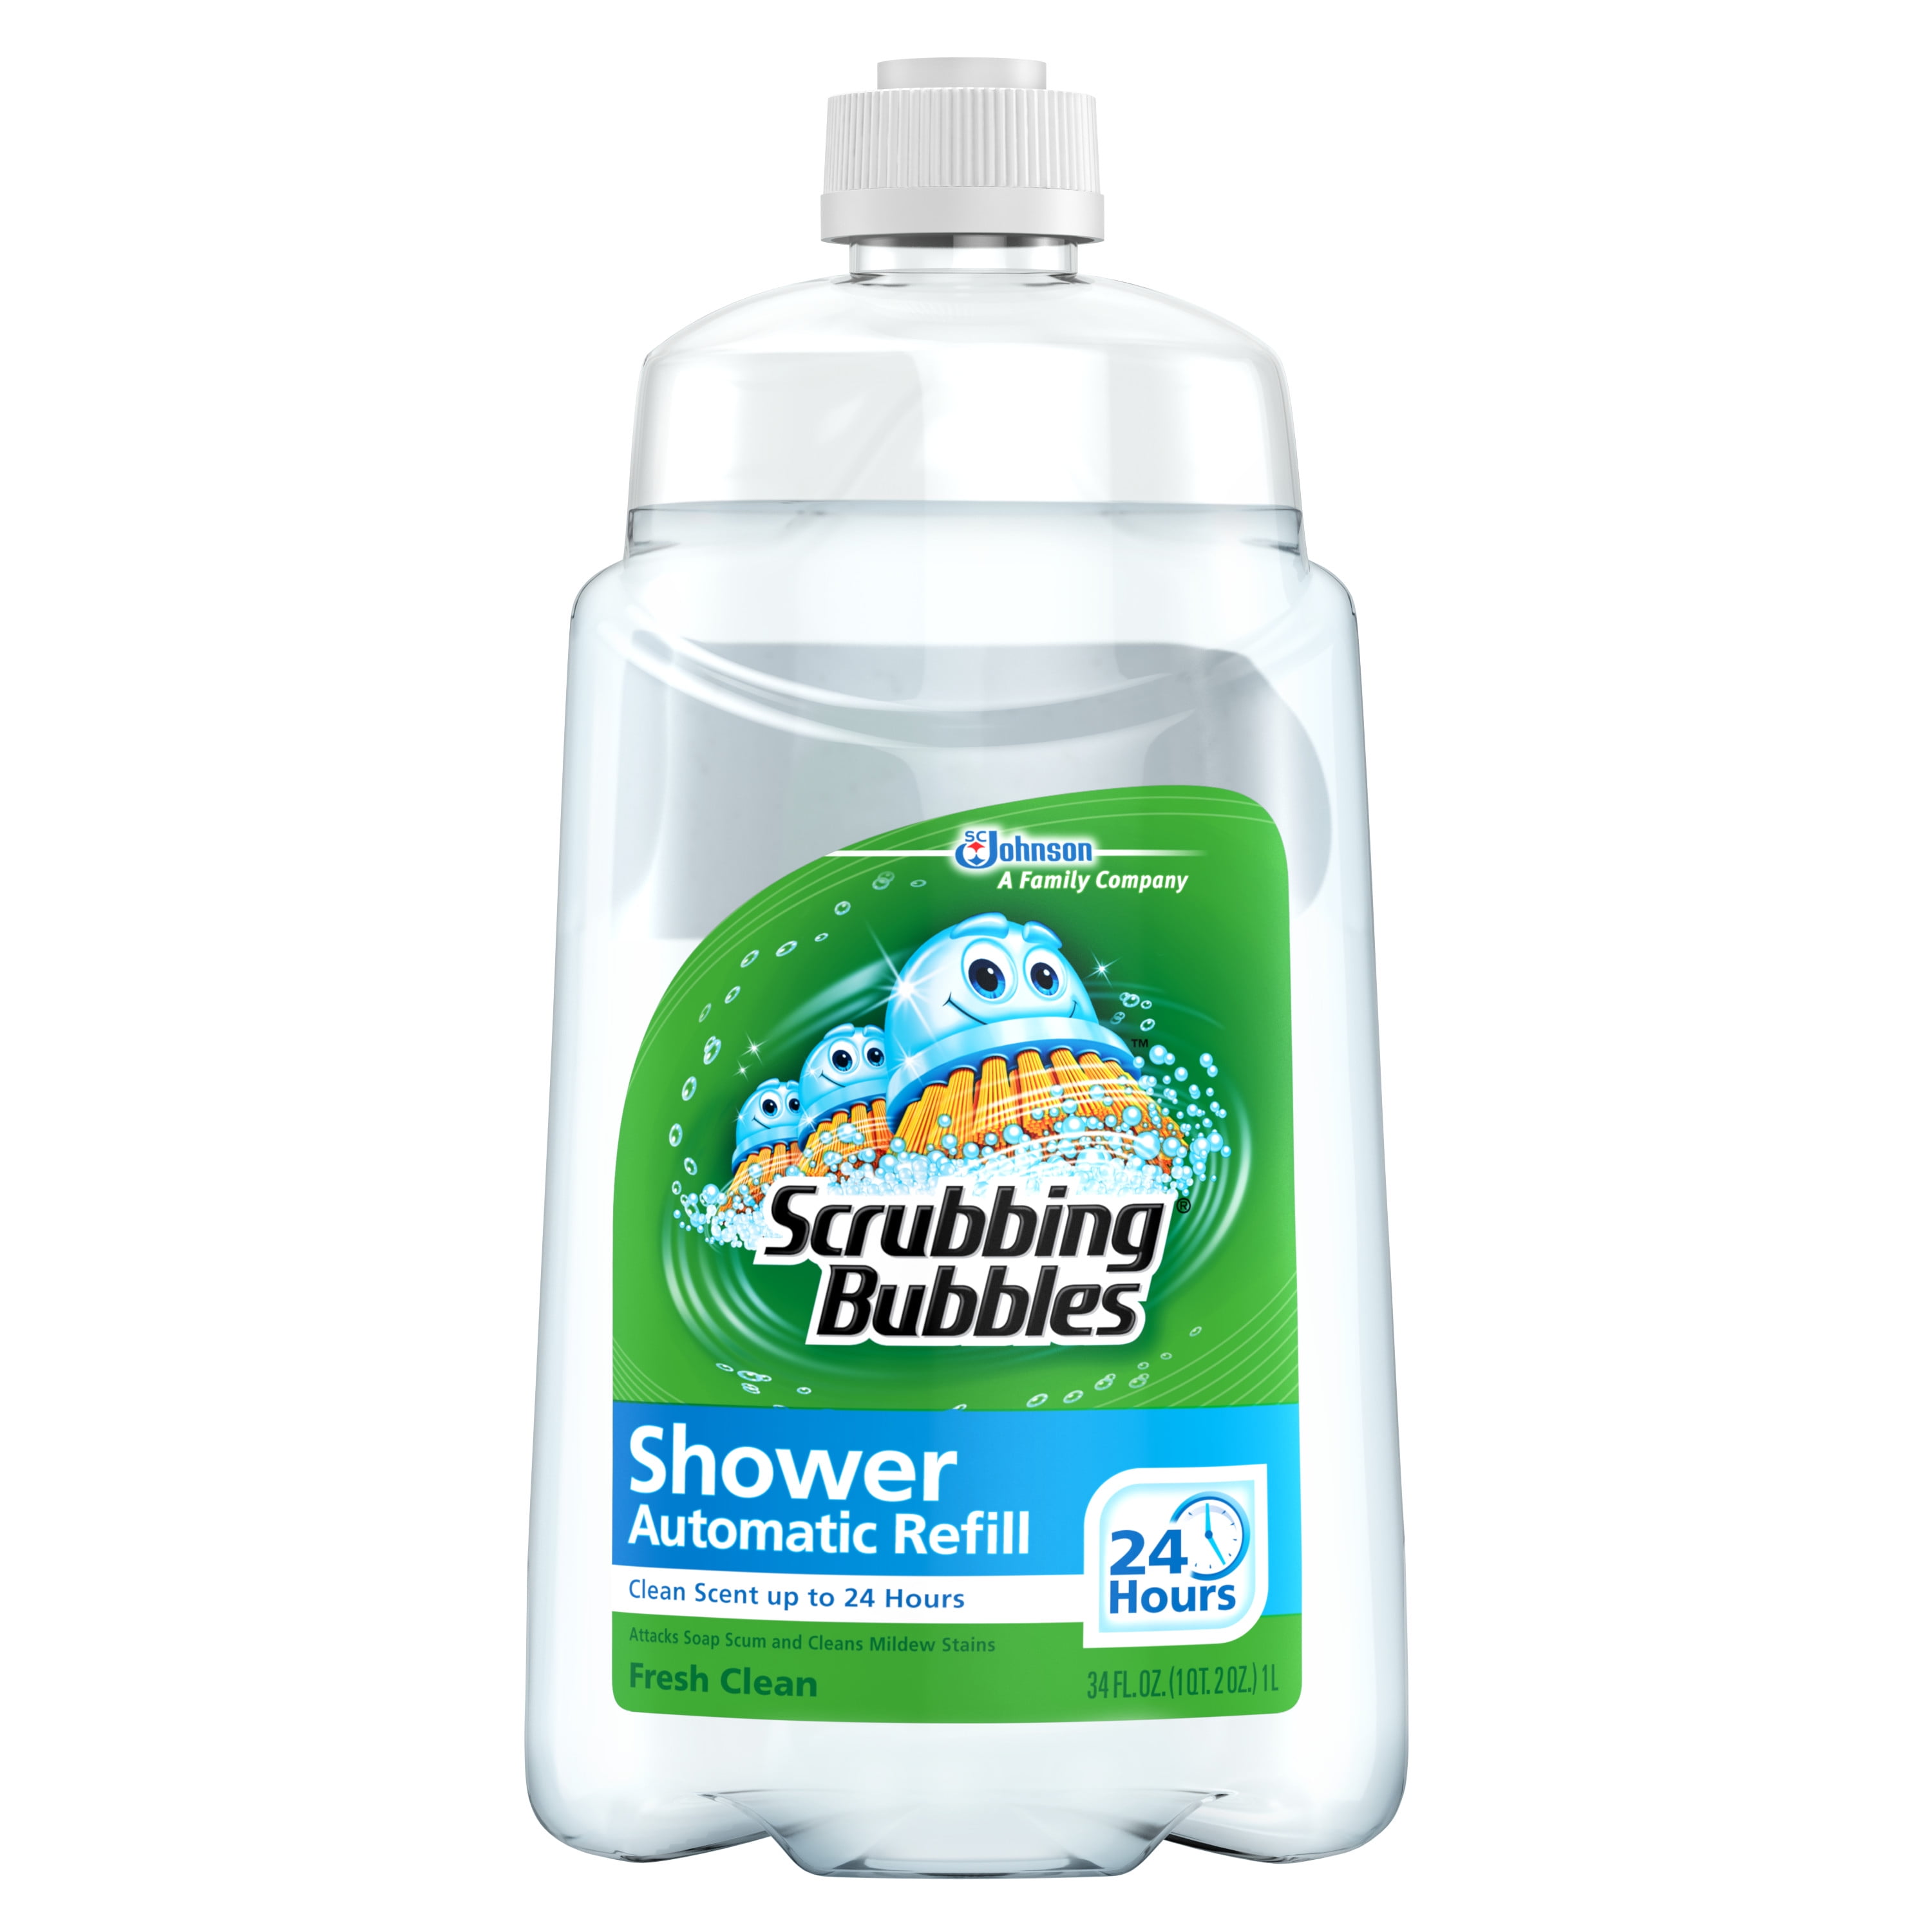 Scrubbing Bubbles® Automatic Shower Cleaner Starter Kit 34 fl oz. Box, Cleaning